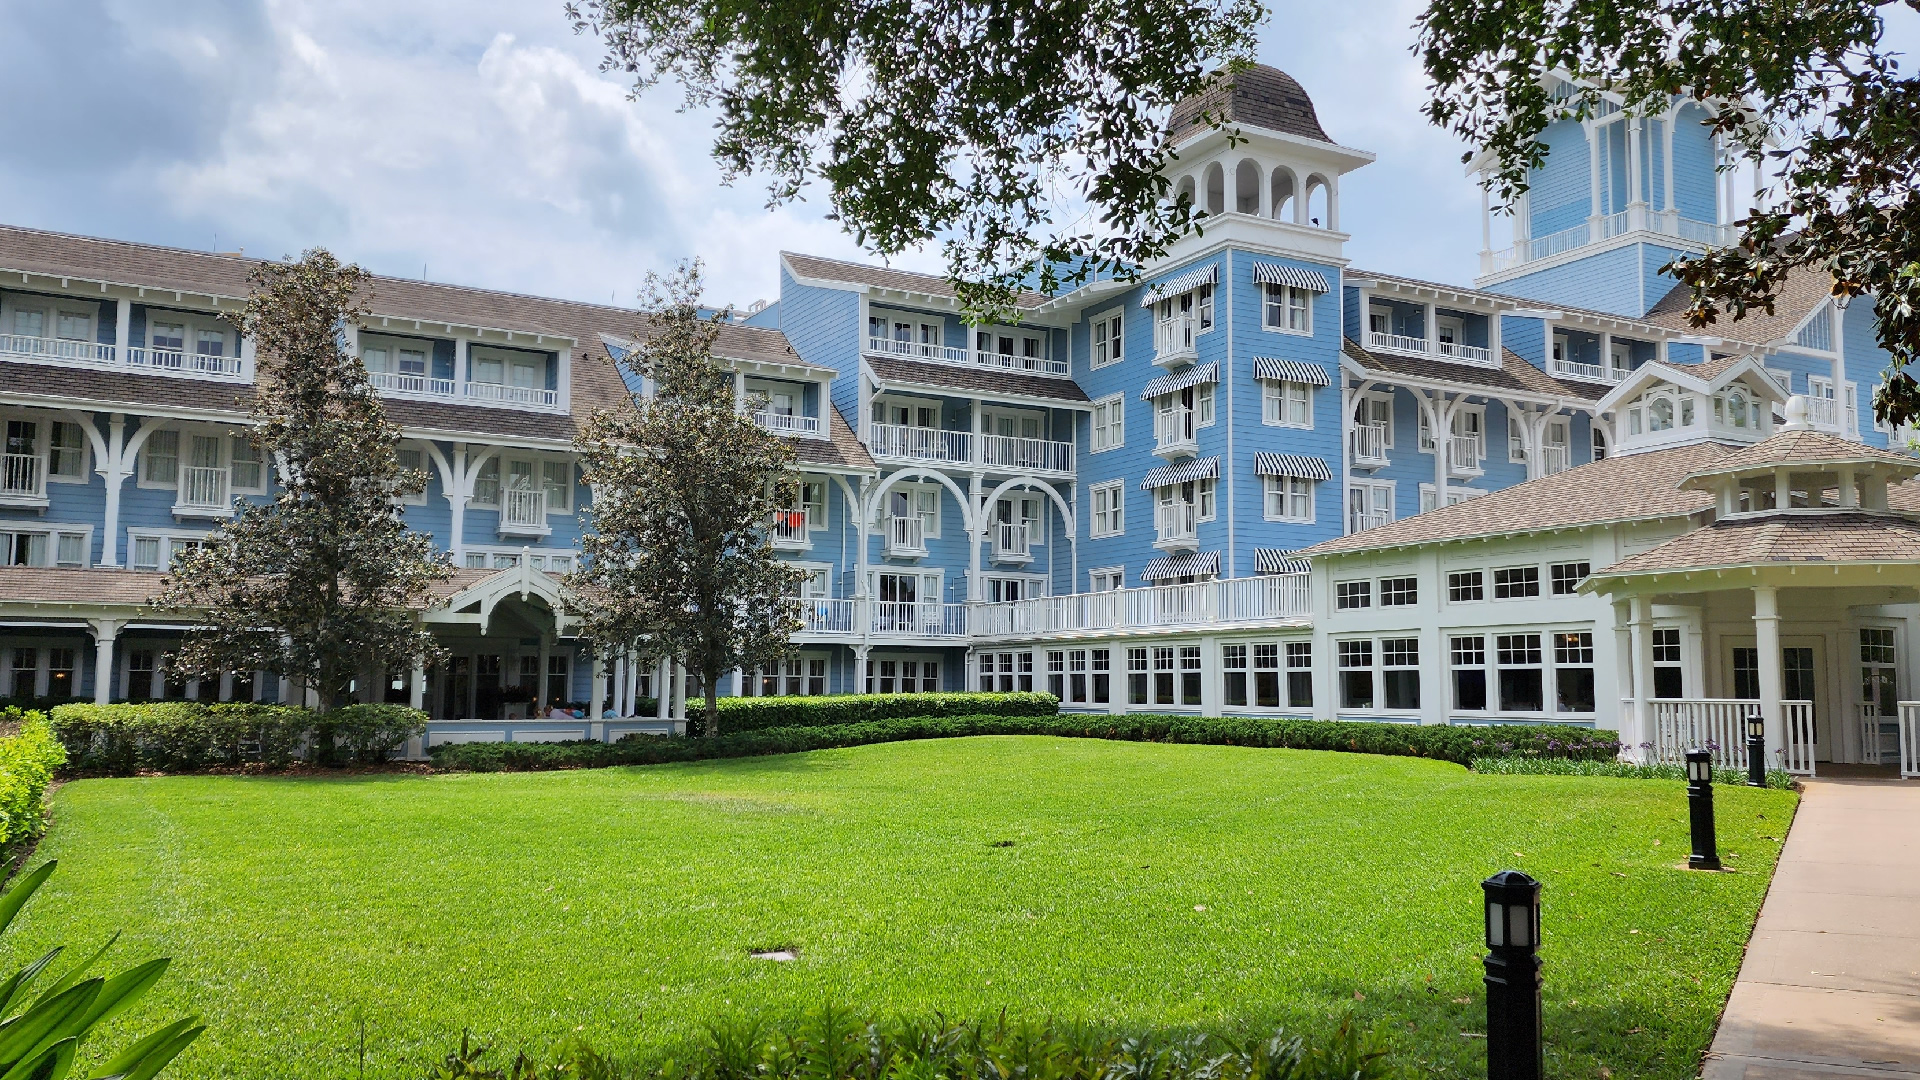 Front of Disney's Beach Club Resort. Bright blue building with white trim and porch. There is grass in front of the building and trees overhead.